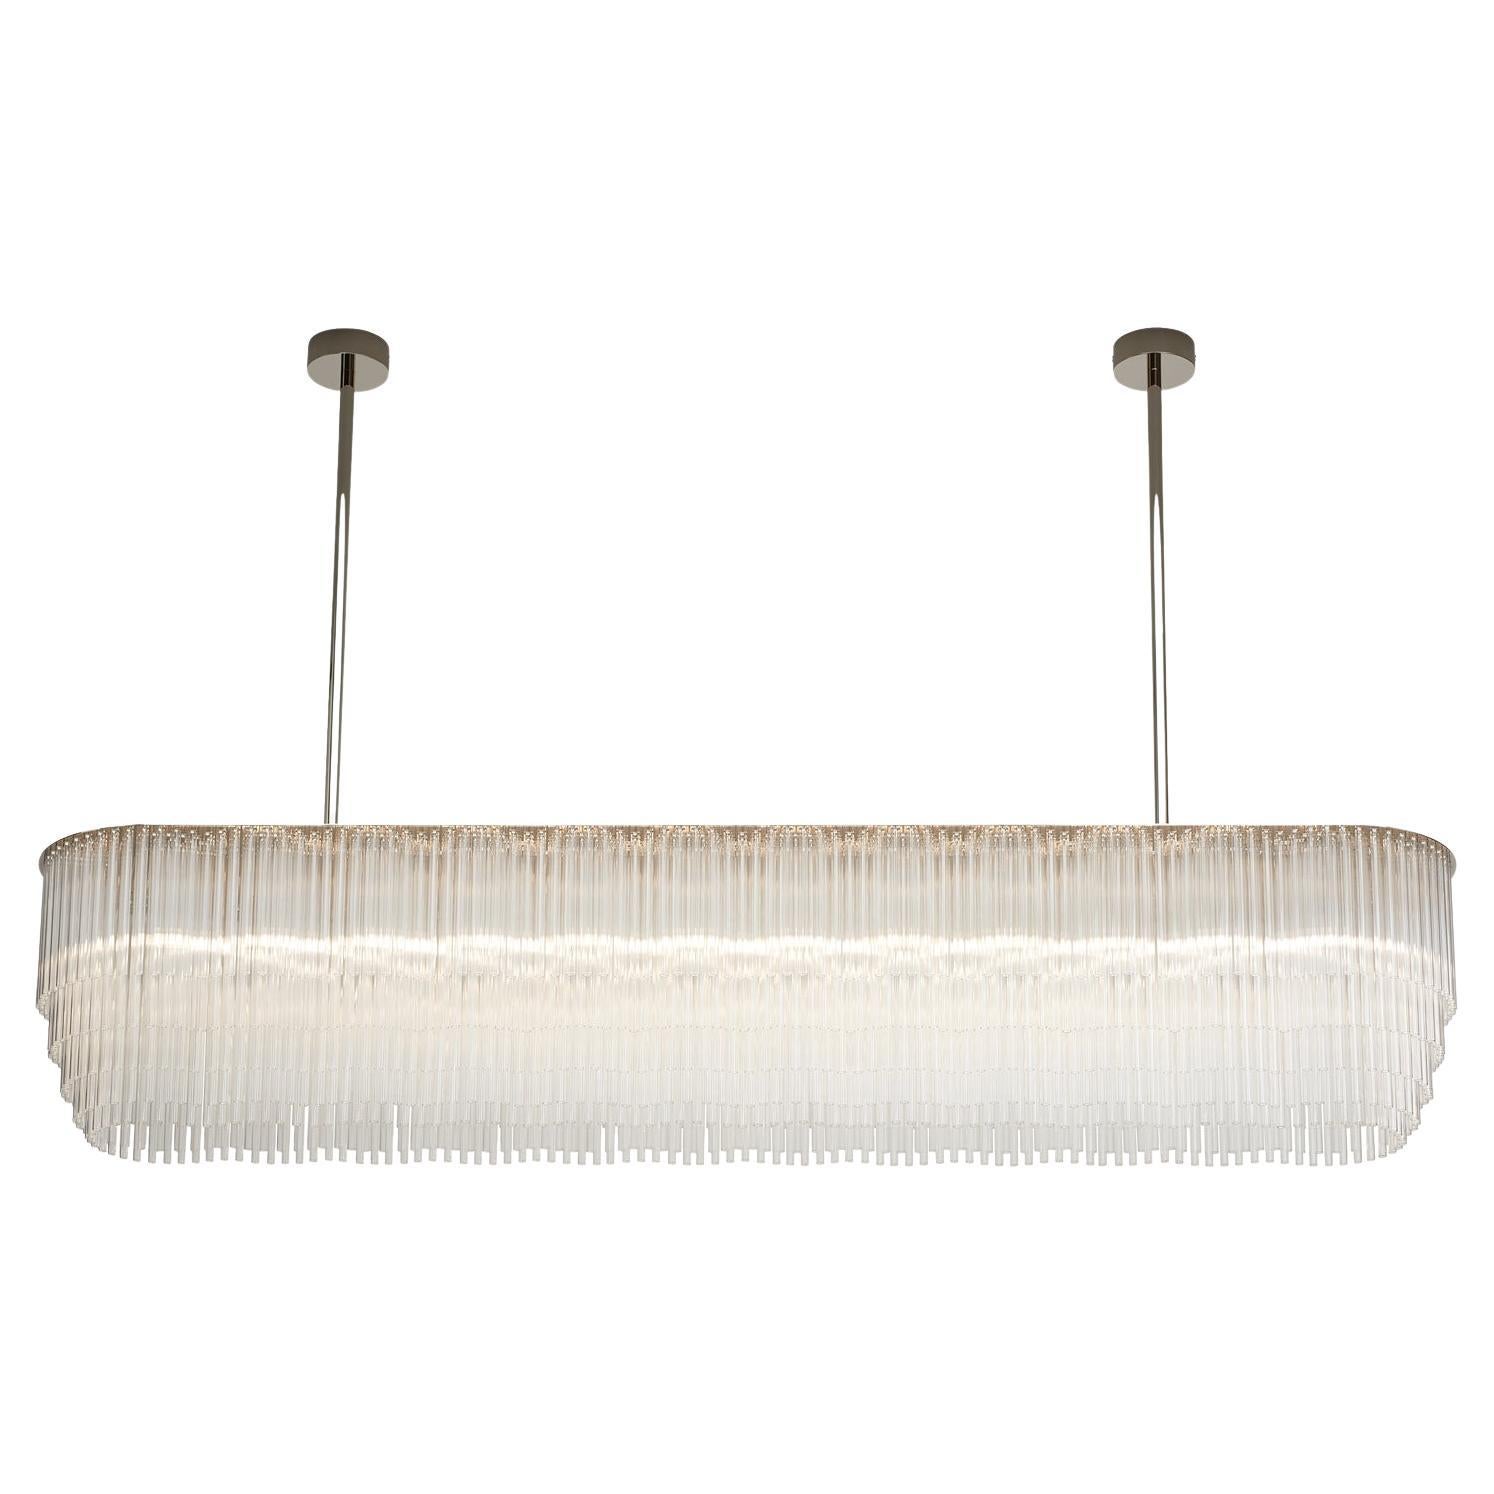 Linear Chandelier 1261mm / 25.75" in Polished Nickel with Tiered Glass Profile For Sale